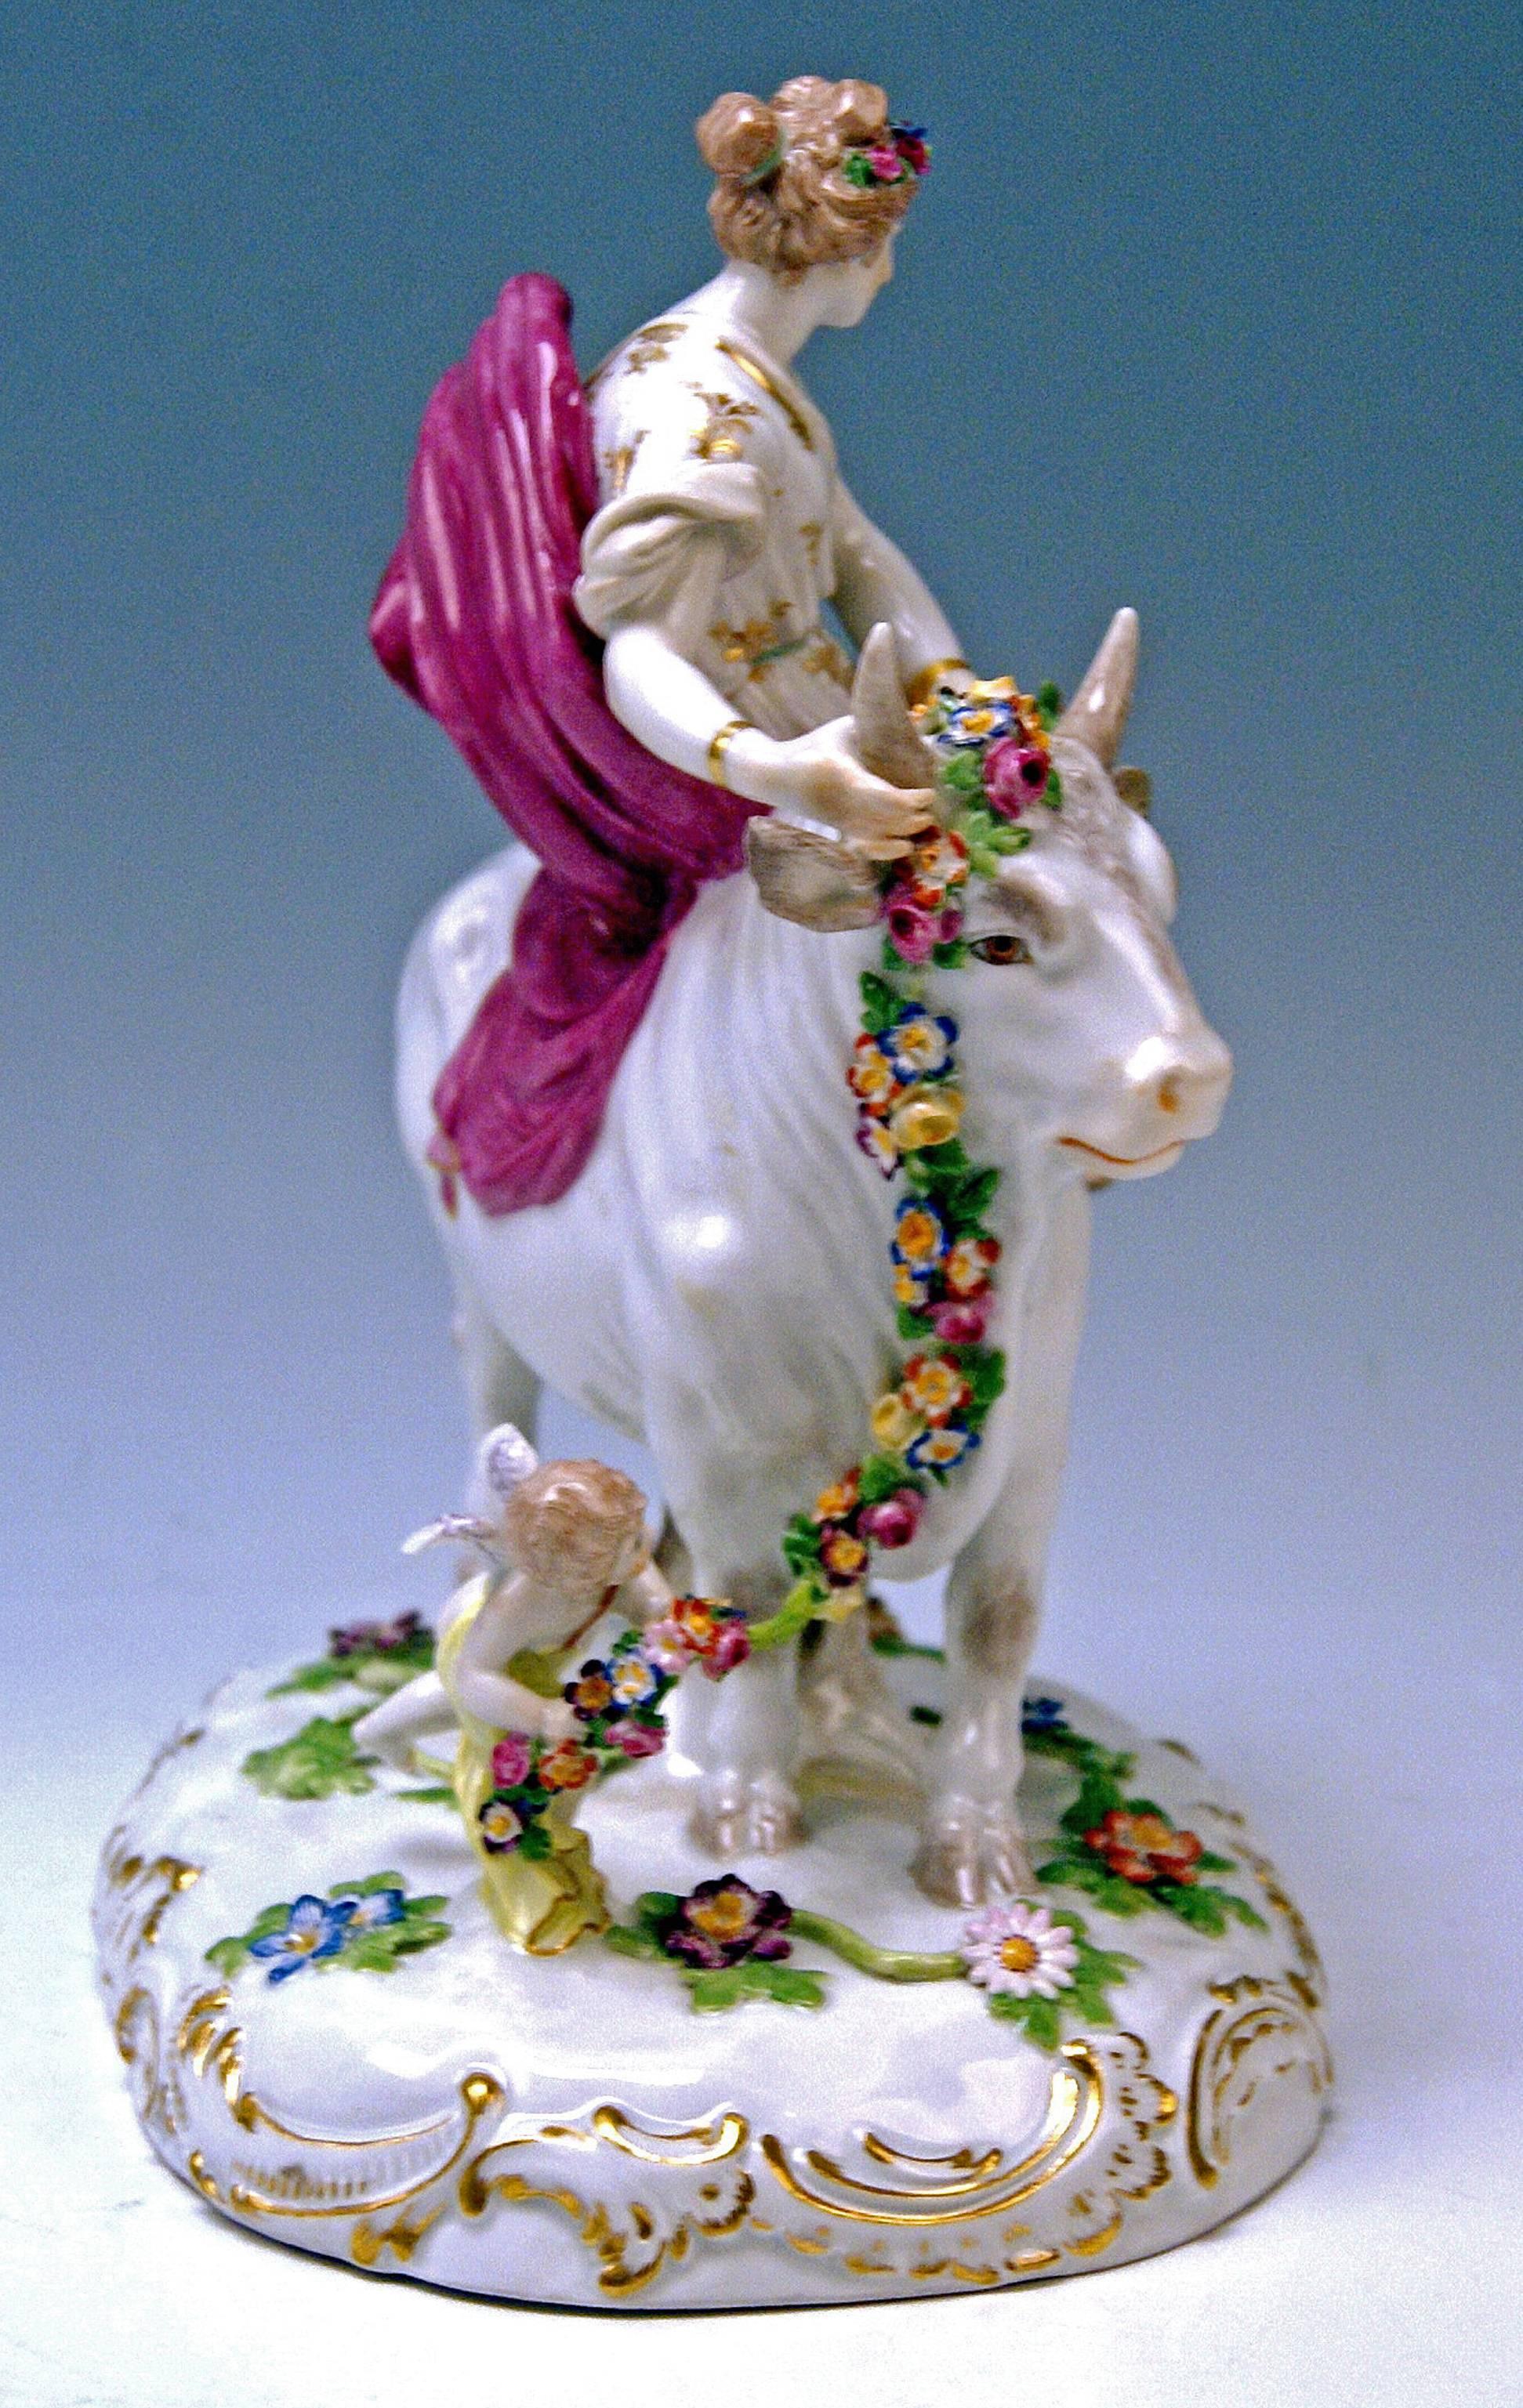 Porcelain Meissen Figurines Europe Riding on White Bull by G. Juechtzer made circa 1880